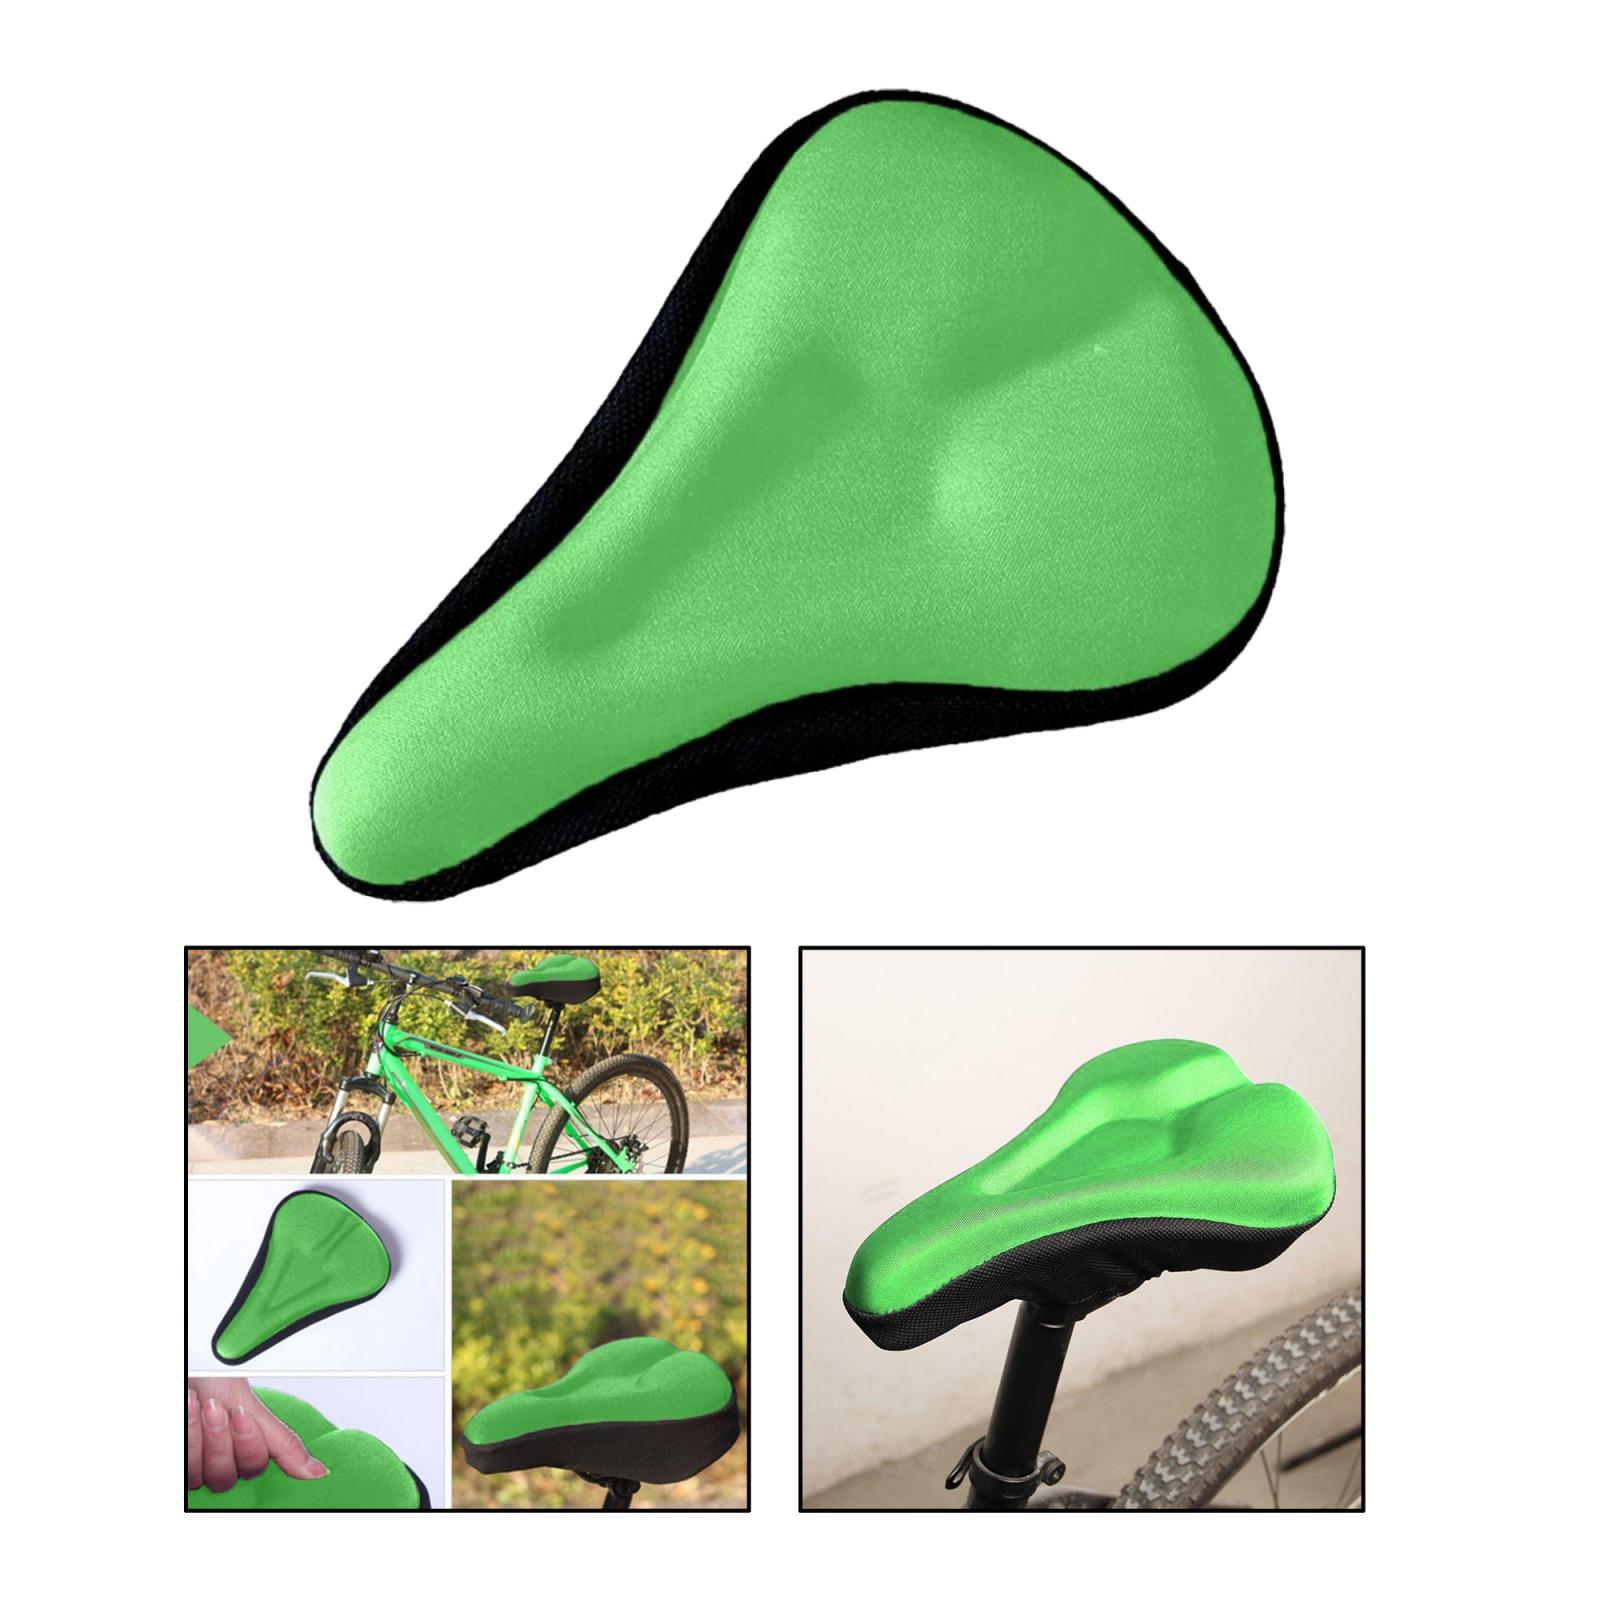 Bike Seat Cover Bicycle Silicone 3D Gel Saddle Pad Padded Soft Cushion Green